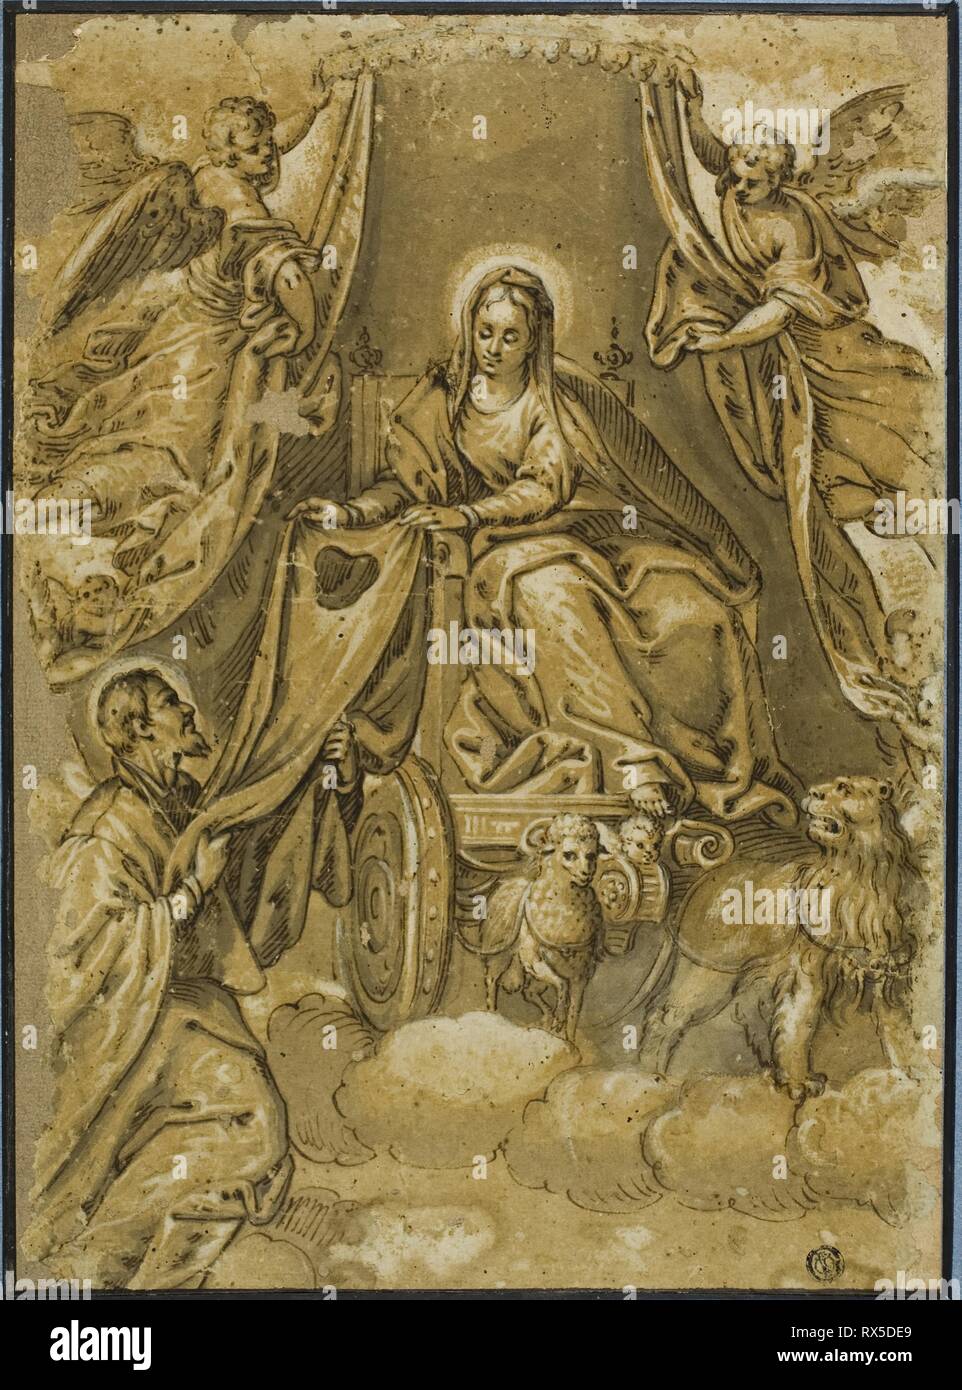 Virgin Mary Handing Scapular to Saint Simon Stock. Paolo Caliari, called Paolo Veronese; Italian, 1528-1588. Date: 1550-1600. Dimensions: 344 x 250 mm. Pen and iron gall ink, brown and gray wash, heightened with lead white, on blue laid paper, laid down on blue wove paper and ivory laid card. Origin: Italy. Museum: The Chicago Art Institute. Stock Photo